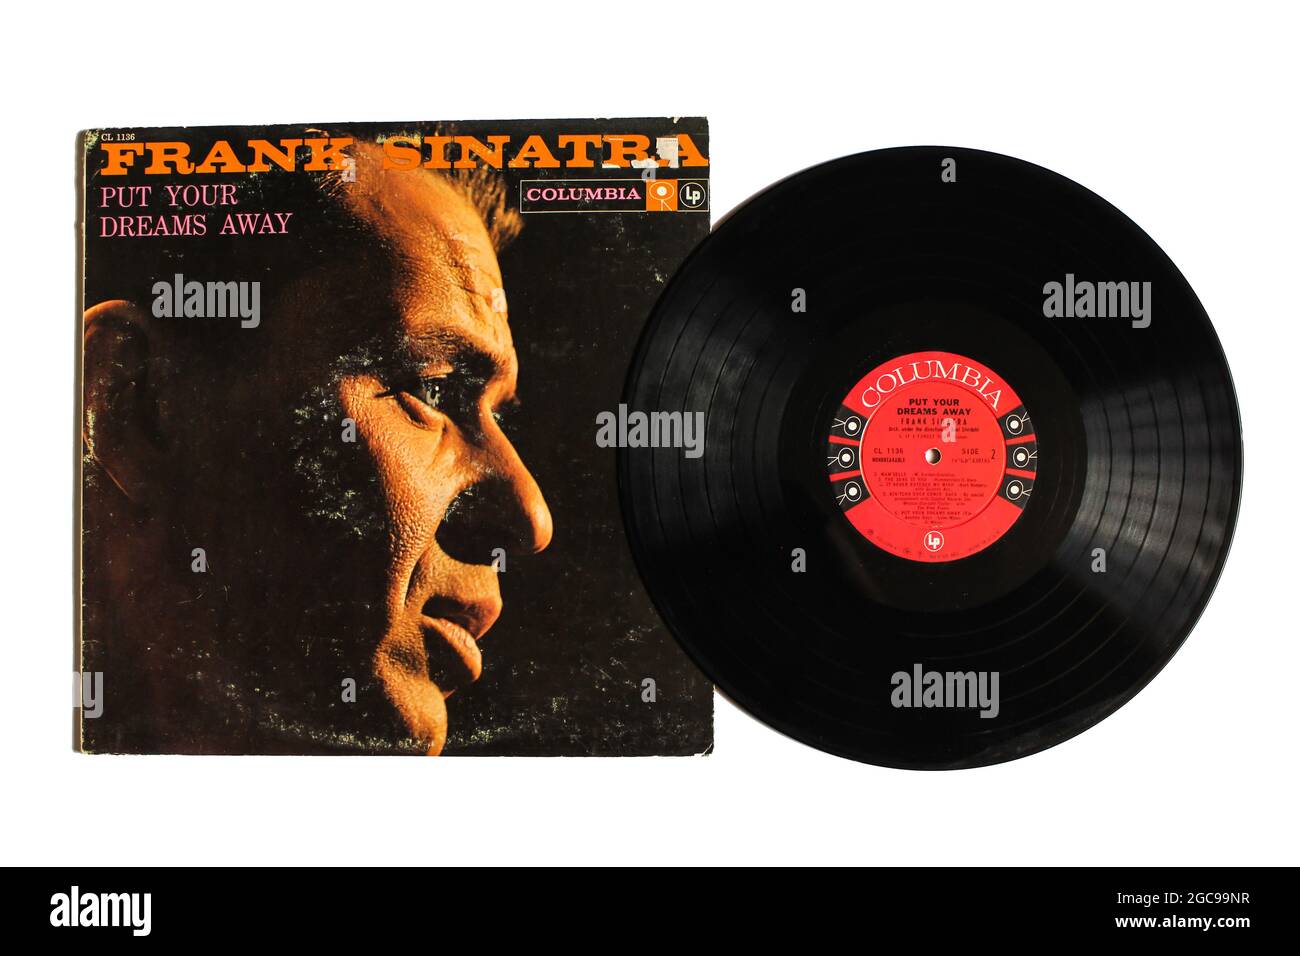 Jazz and easy listening musician, Frank Sinatra music album on vinyl record LP disc. Titled: Put Your Dreams Away album cover Stock Photo